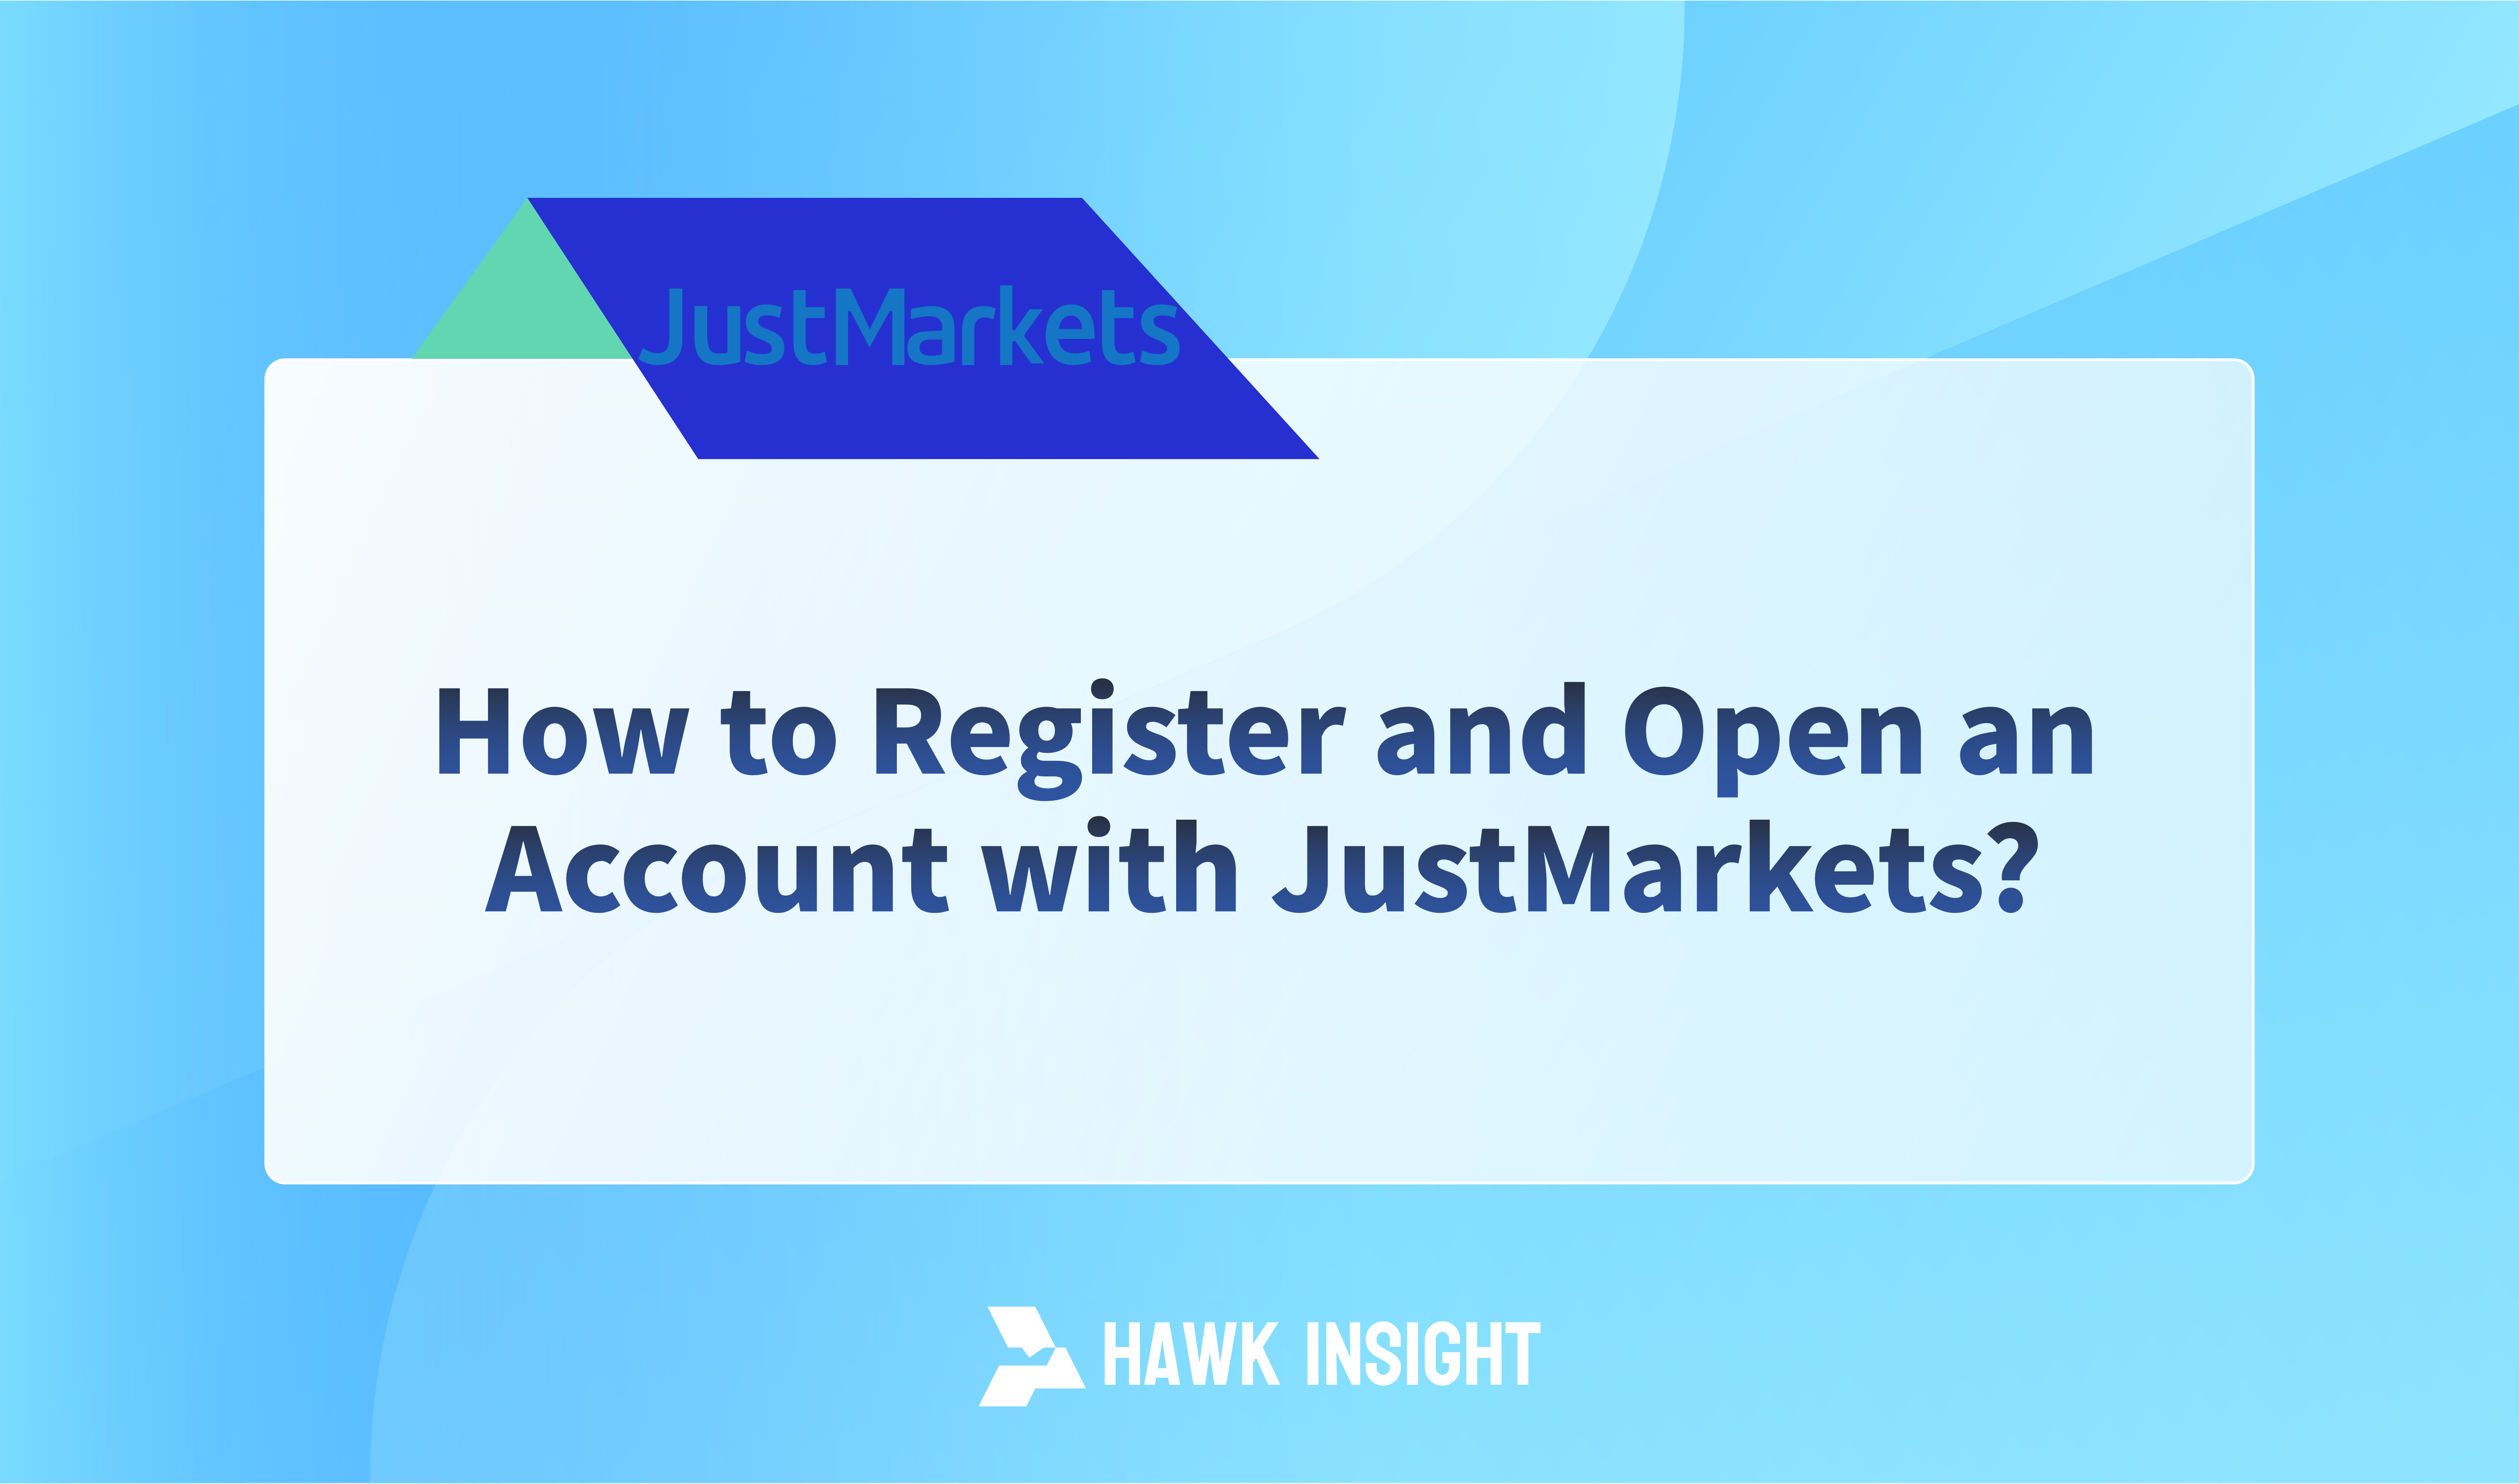 How to Register and Open an Account with JustMarkets?